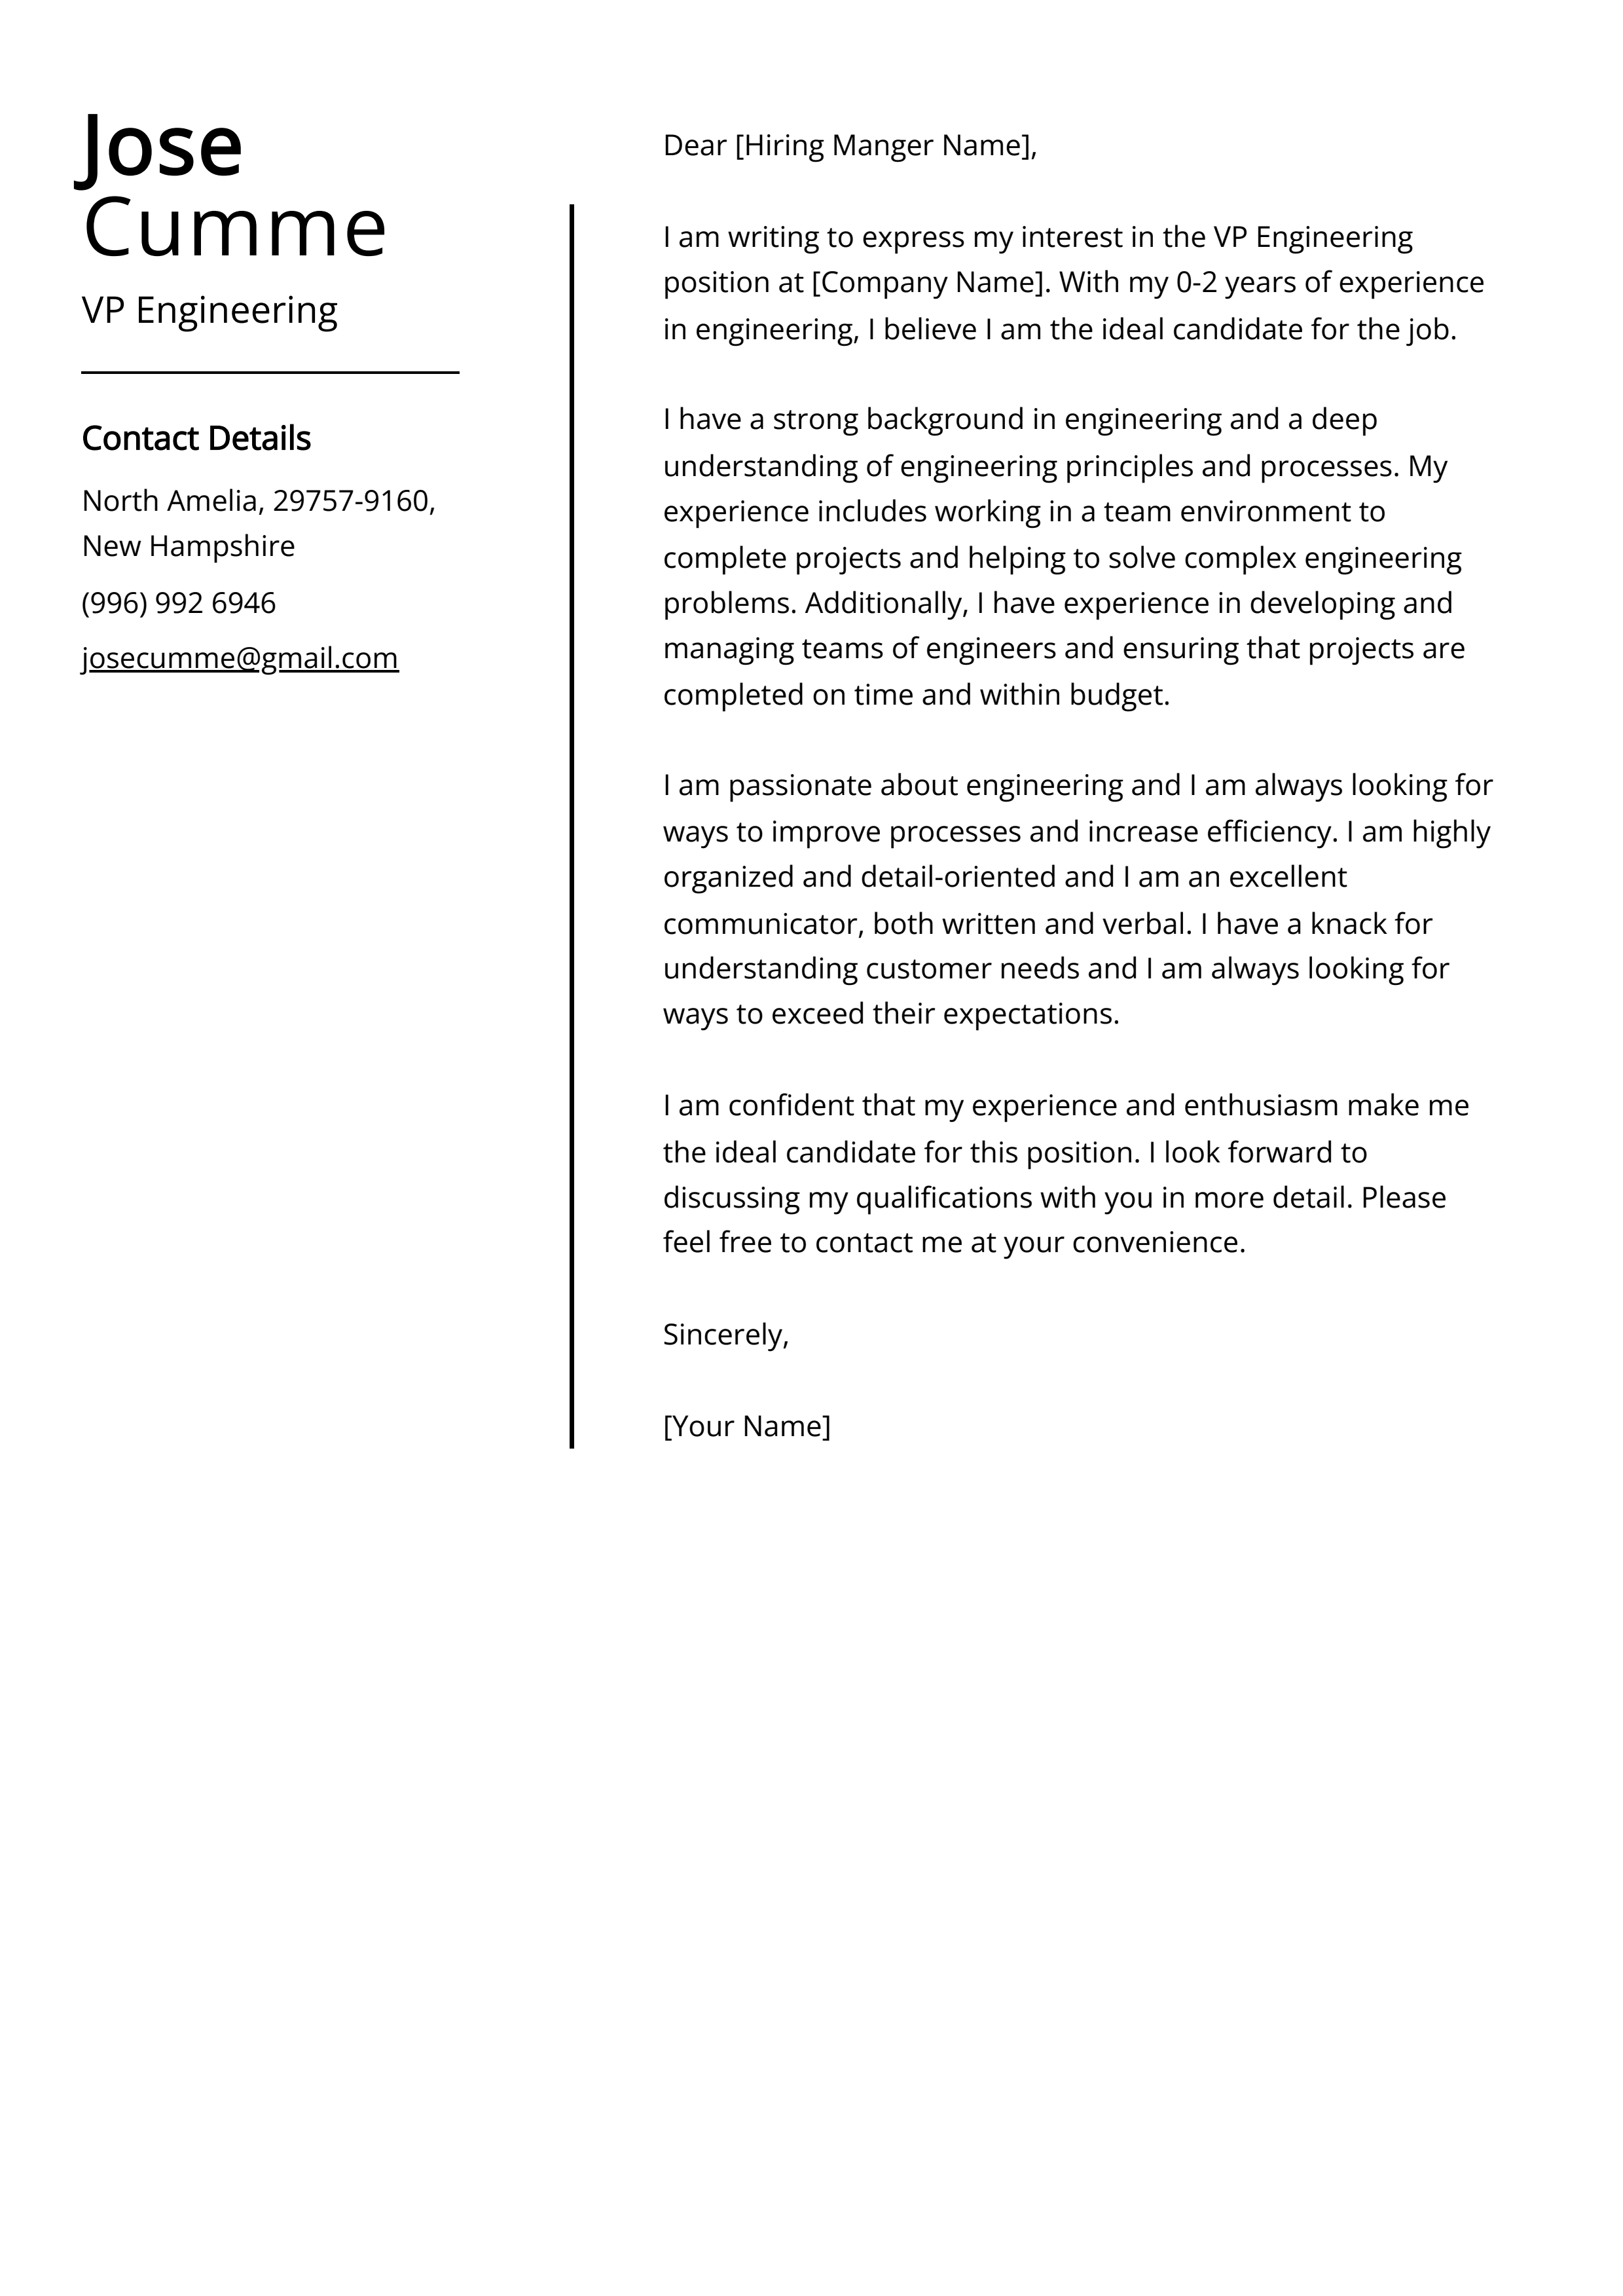 VP Engineering Cover Letter Example